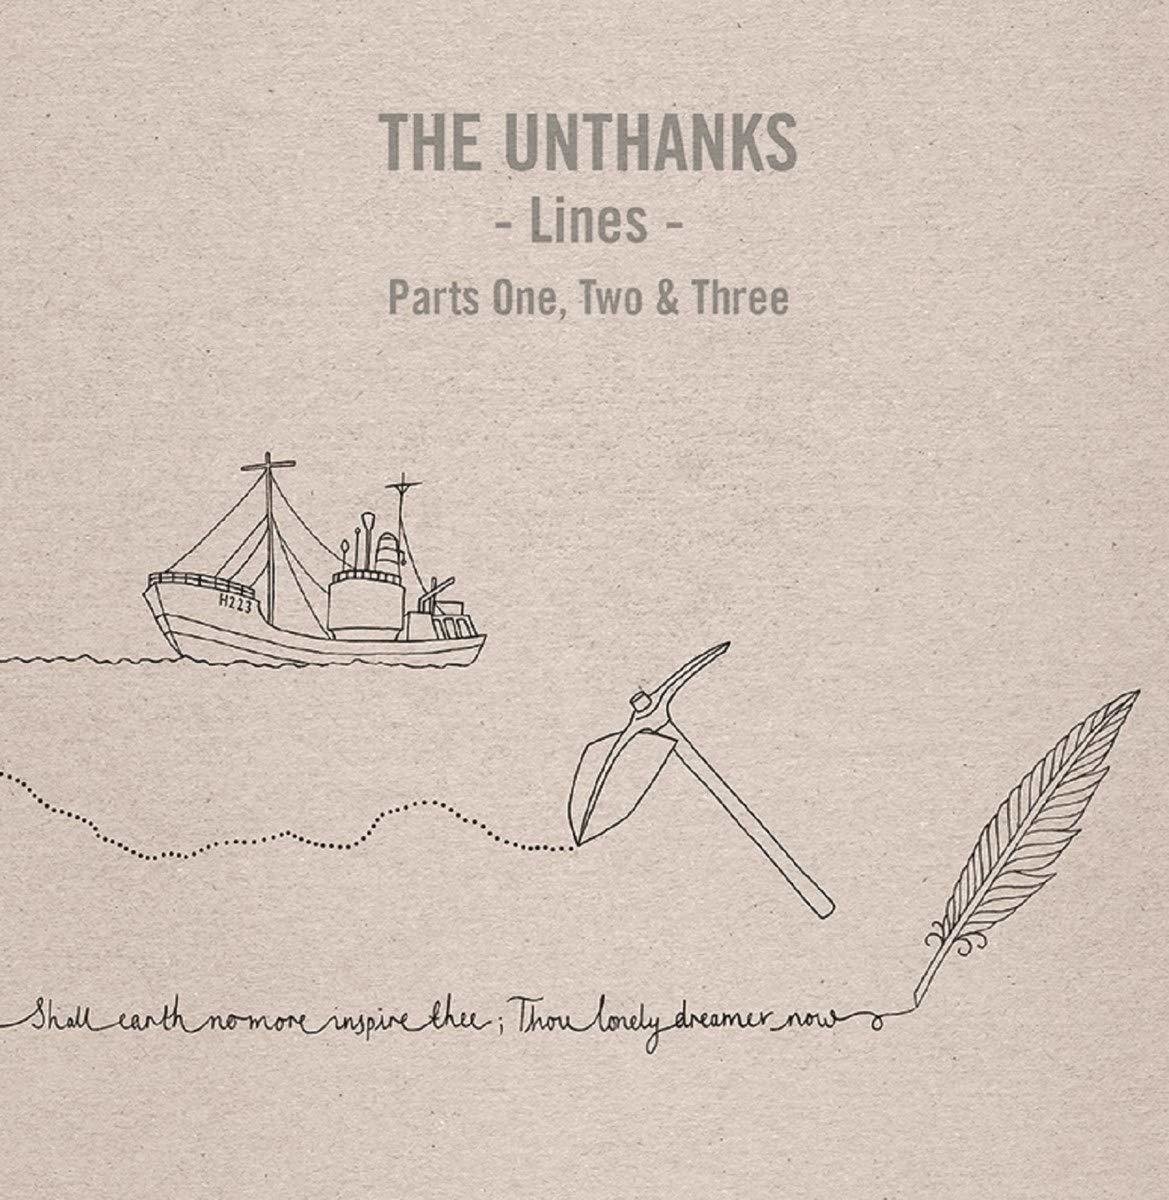 Vinylskiva The Unthanks - Lines - Parts One, Two And Three (3 x 10" Vinyl)